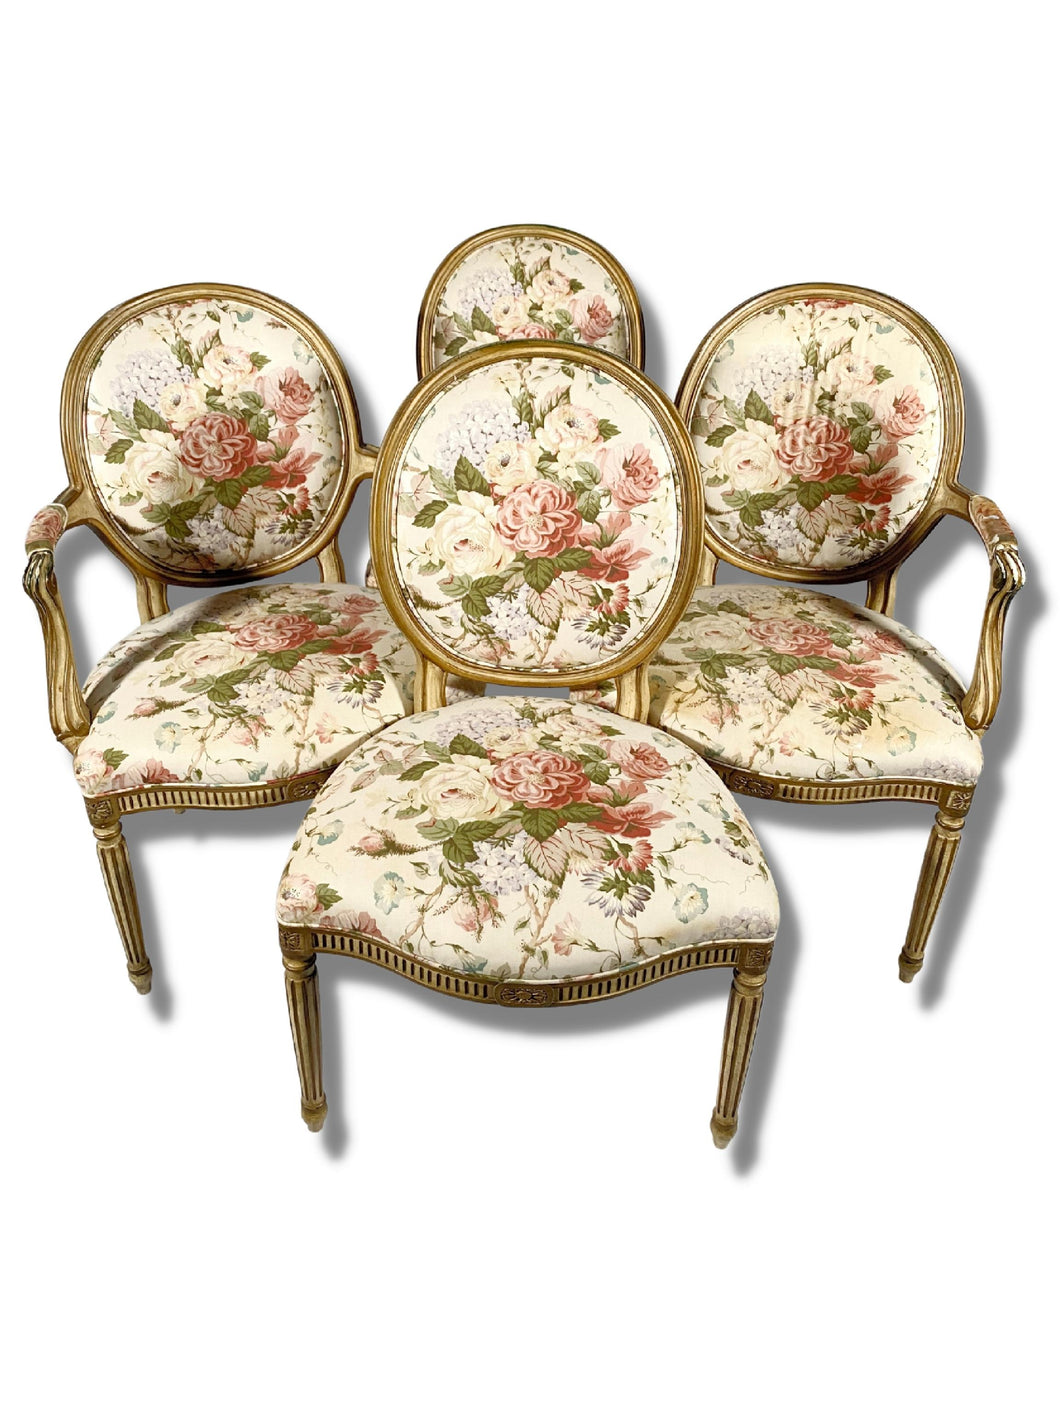 Four Georgian-Style Dining Chairs (Set)